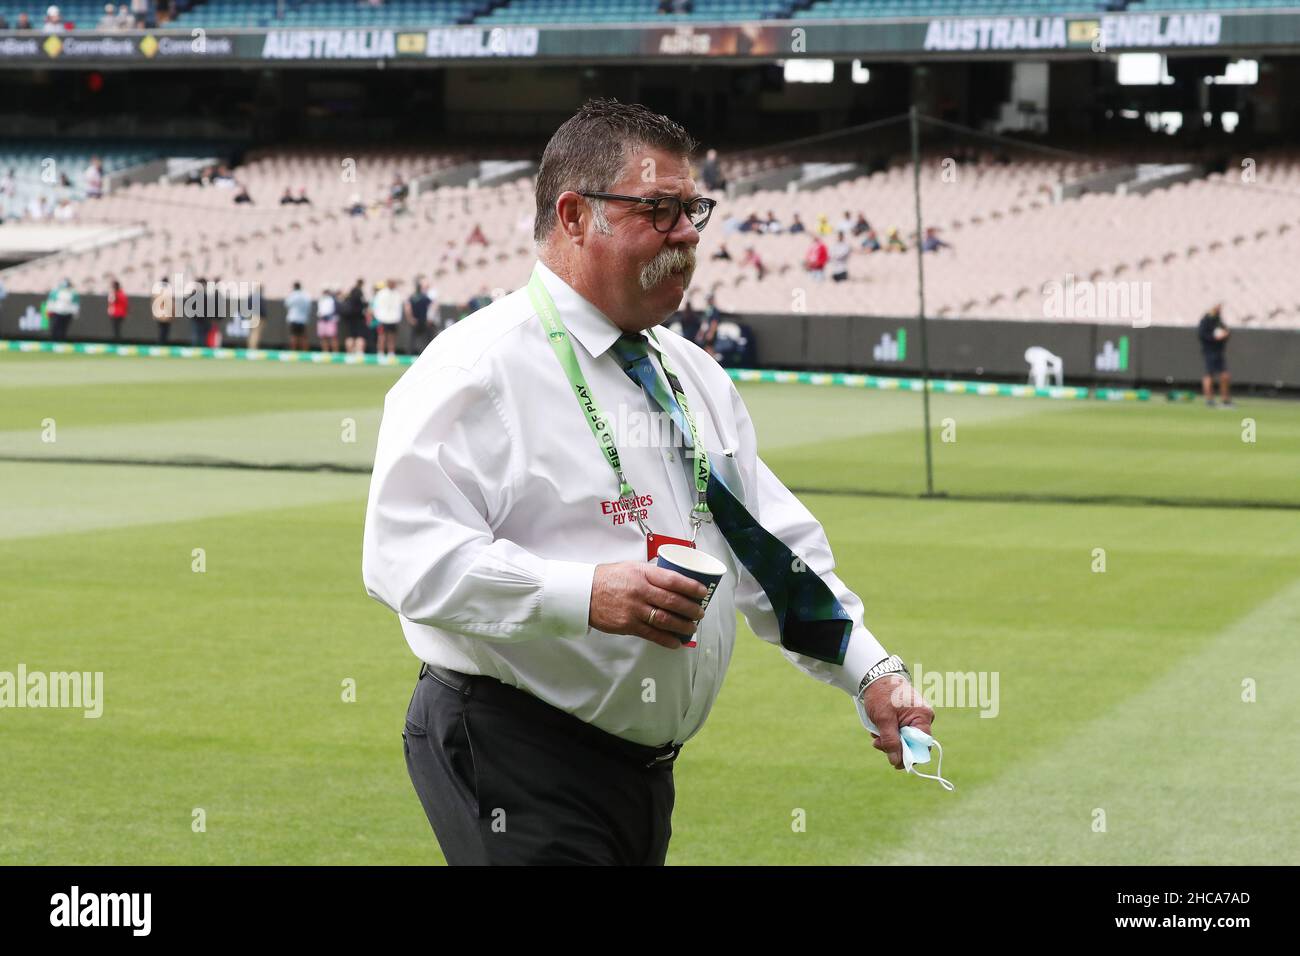 ICC match referee David Boon before the start of play during day two of the third Ashes test at the Melbourne Cricket Ground, Melbourne. Picture date: Monday December 27, 2021. Stock Photo